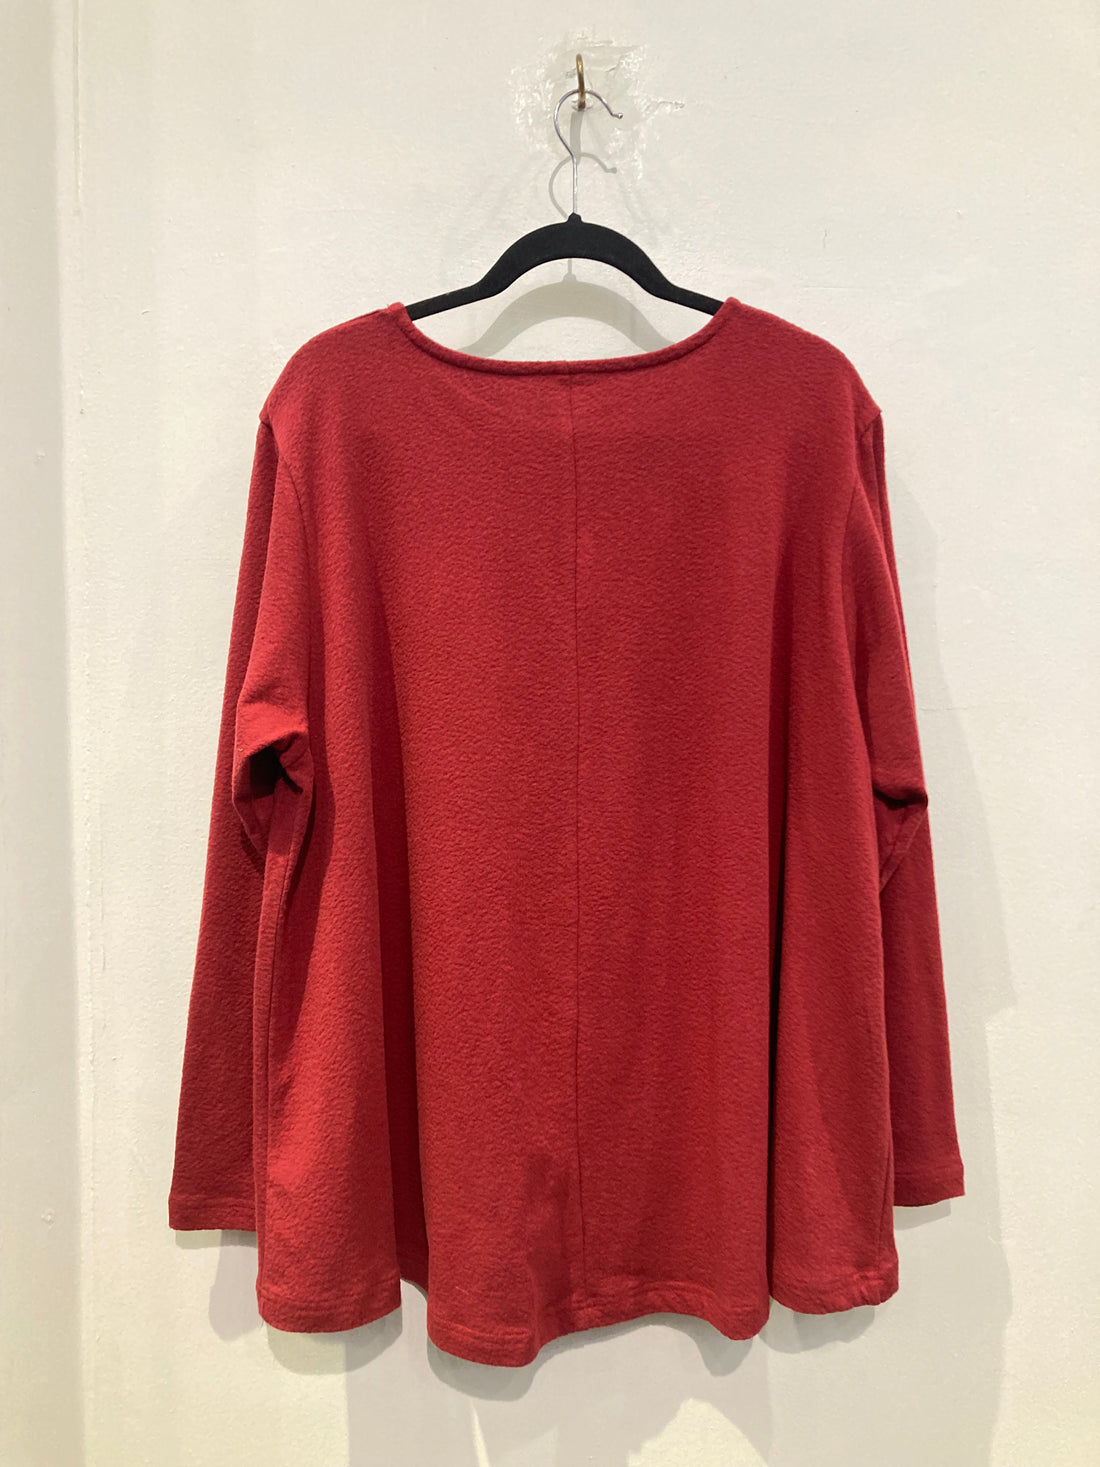 Red Pullover with Black Graphic